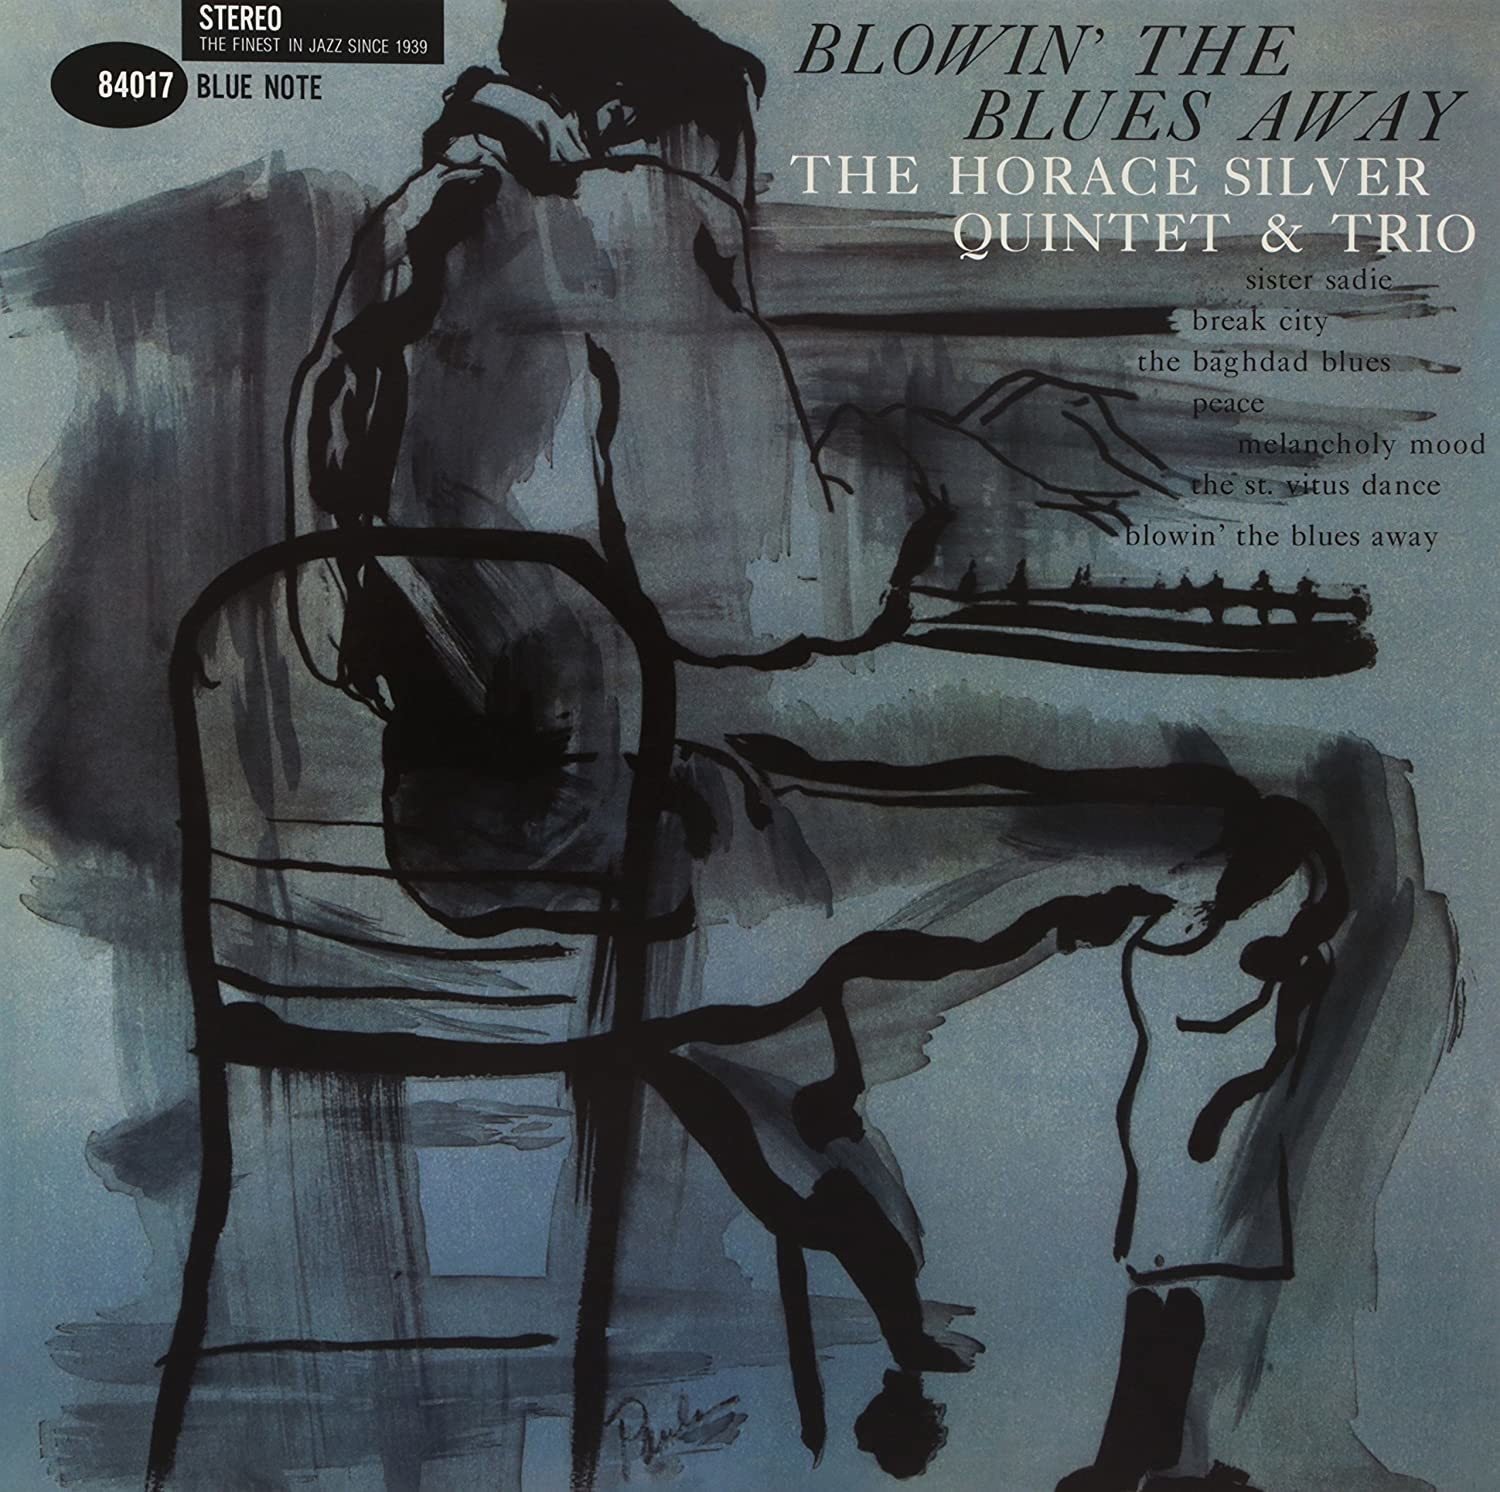 Vinyl Record Horace Silver - Blowin' The Blues Away (2 LP)